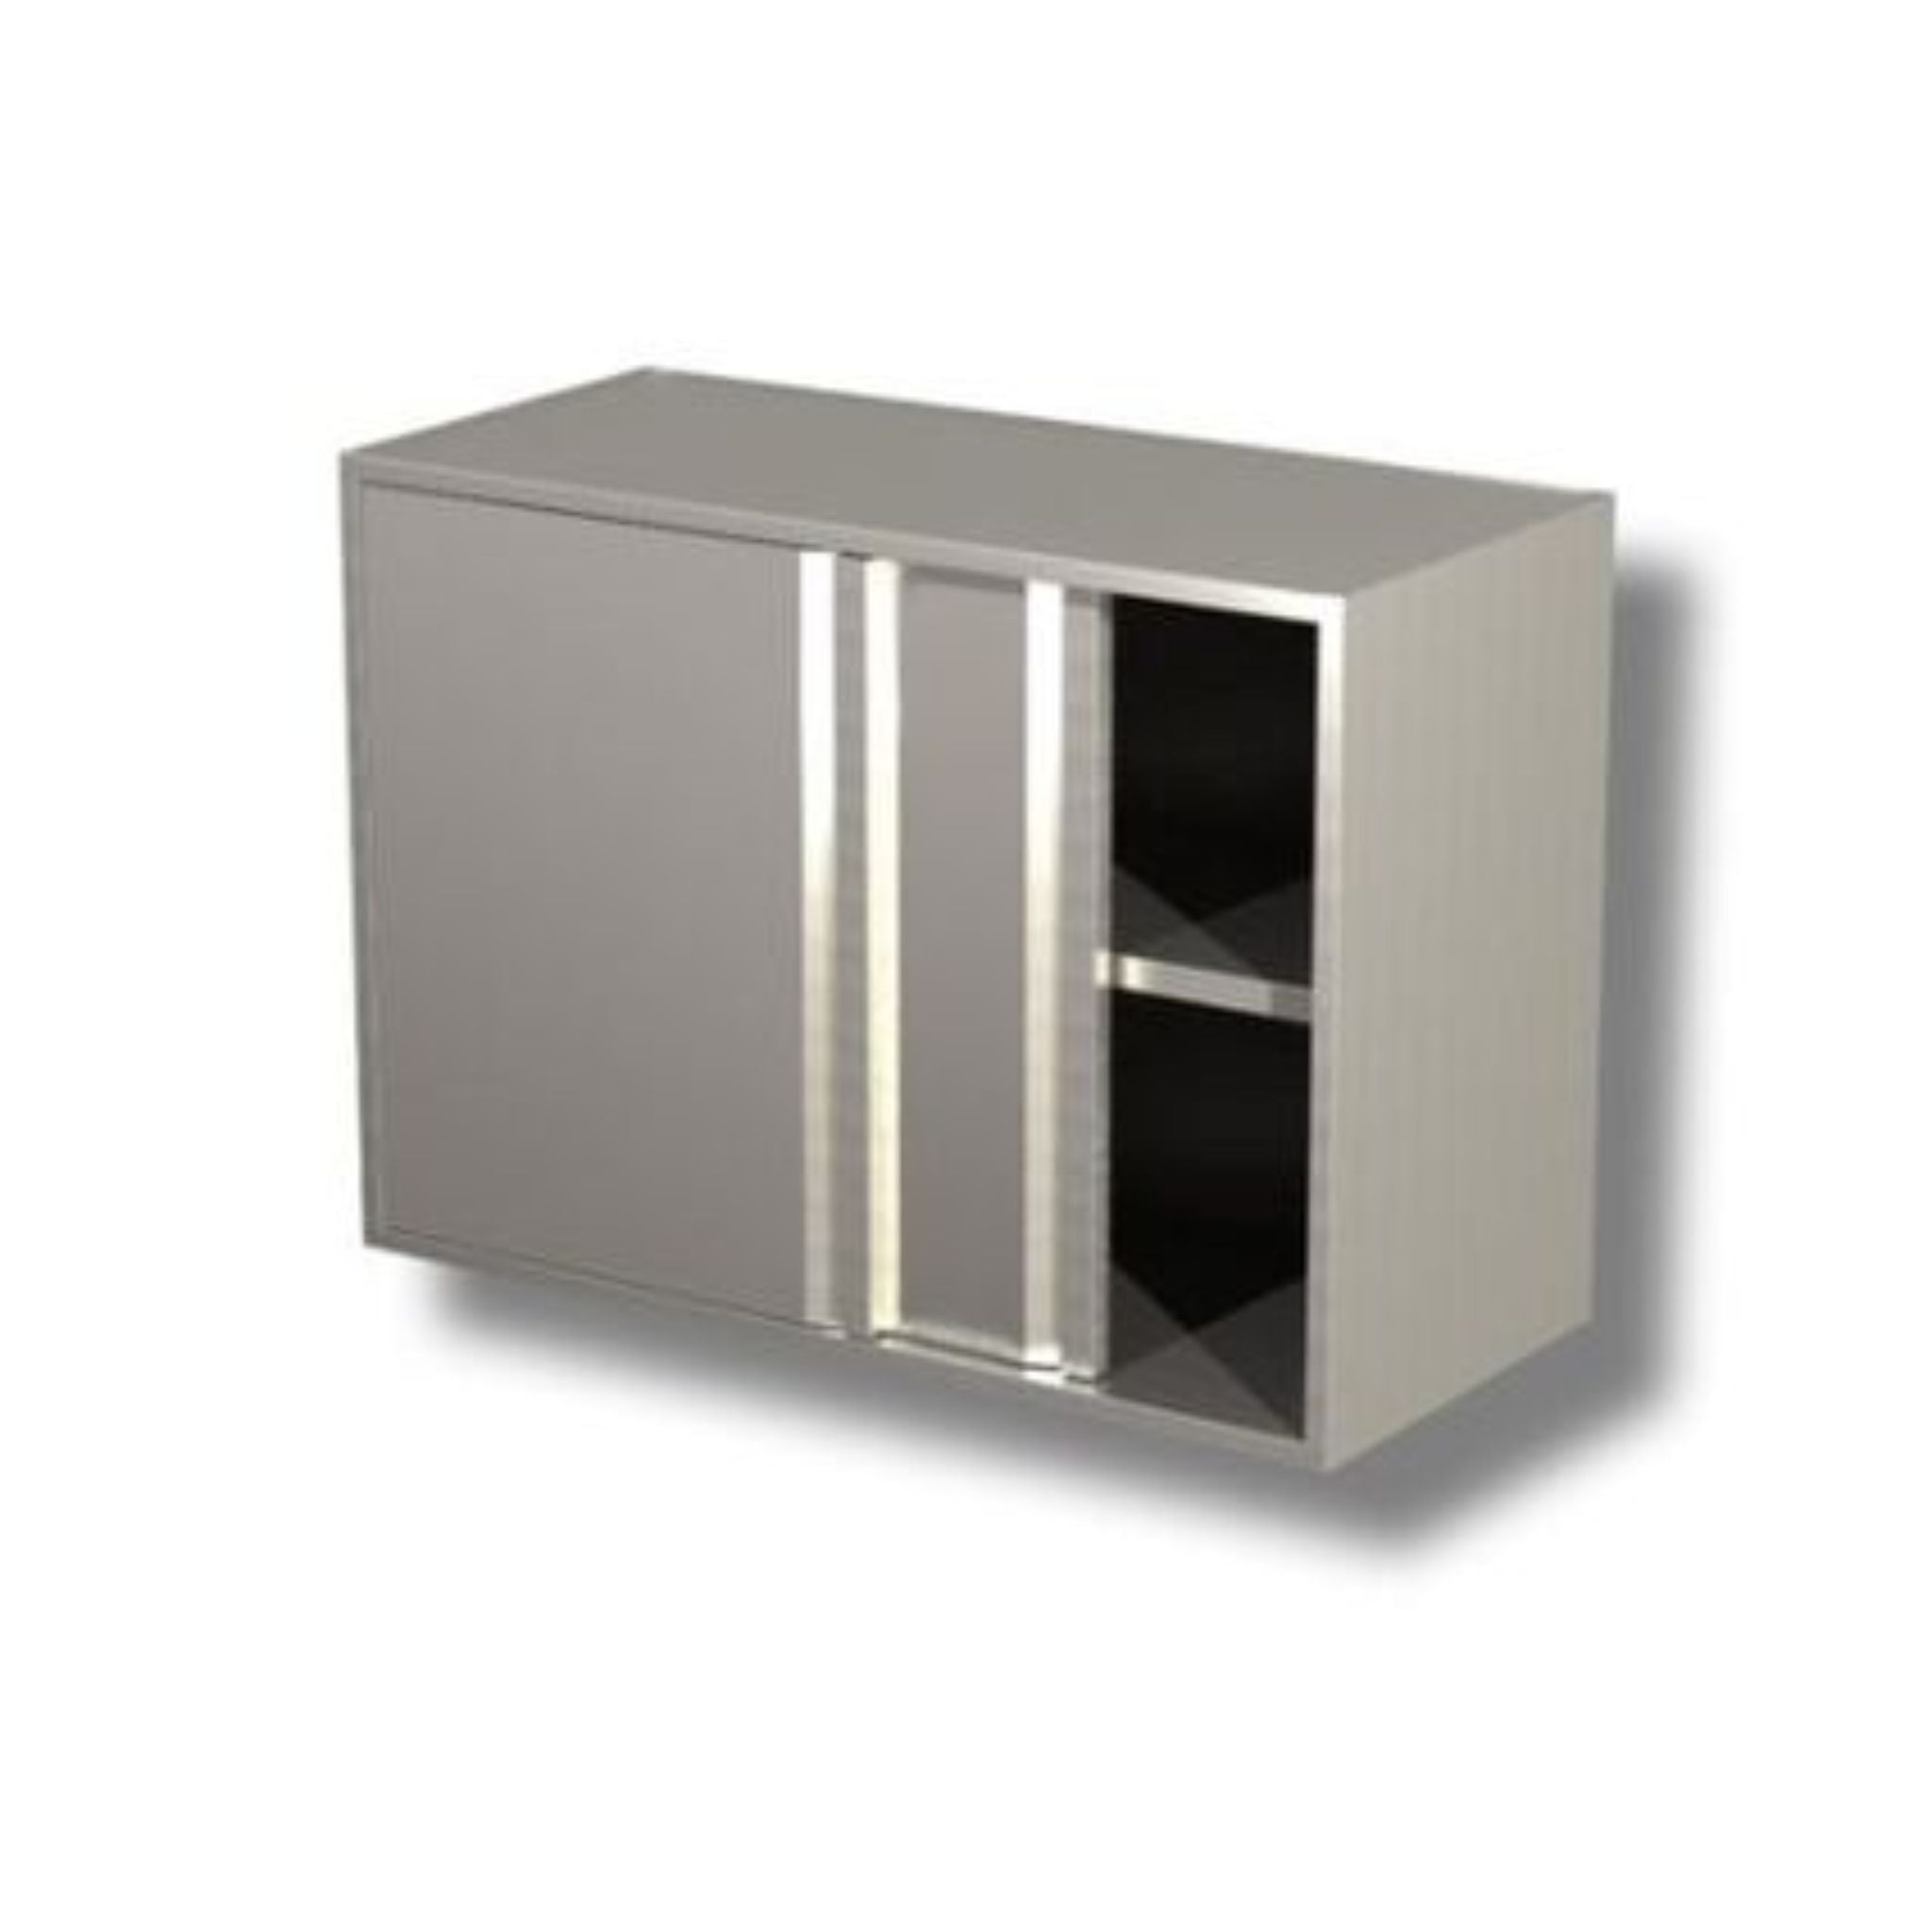 Stainless steel wall cabinet with standard sliding doors